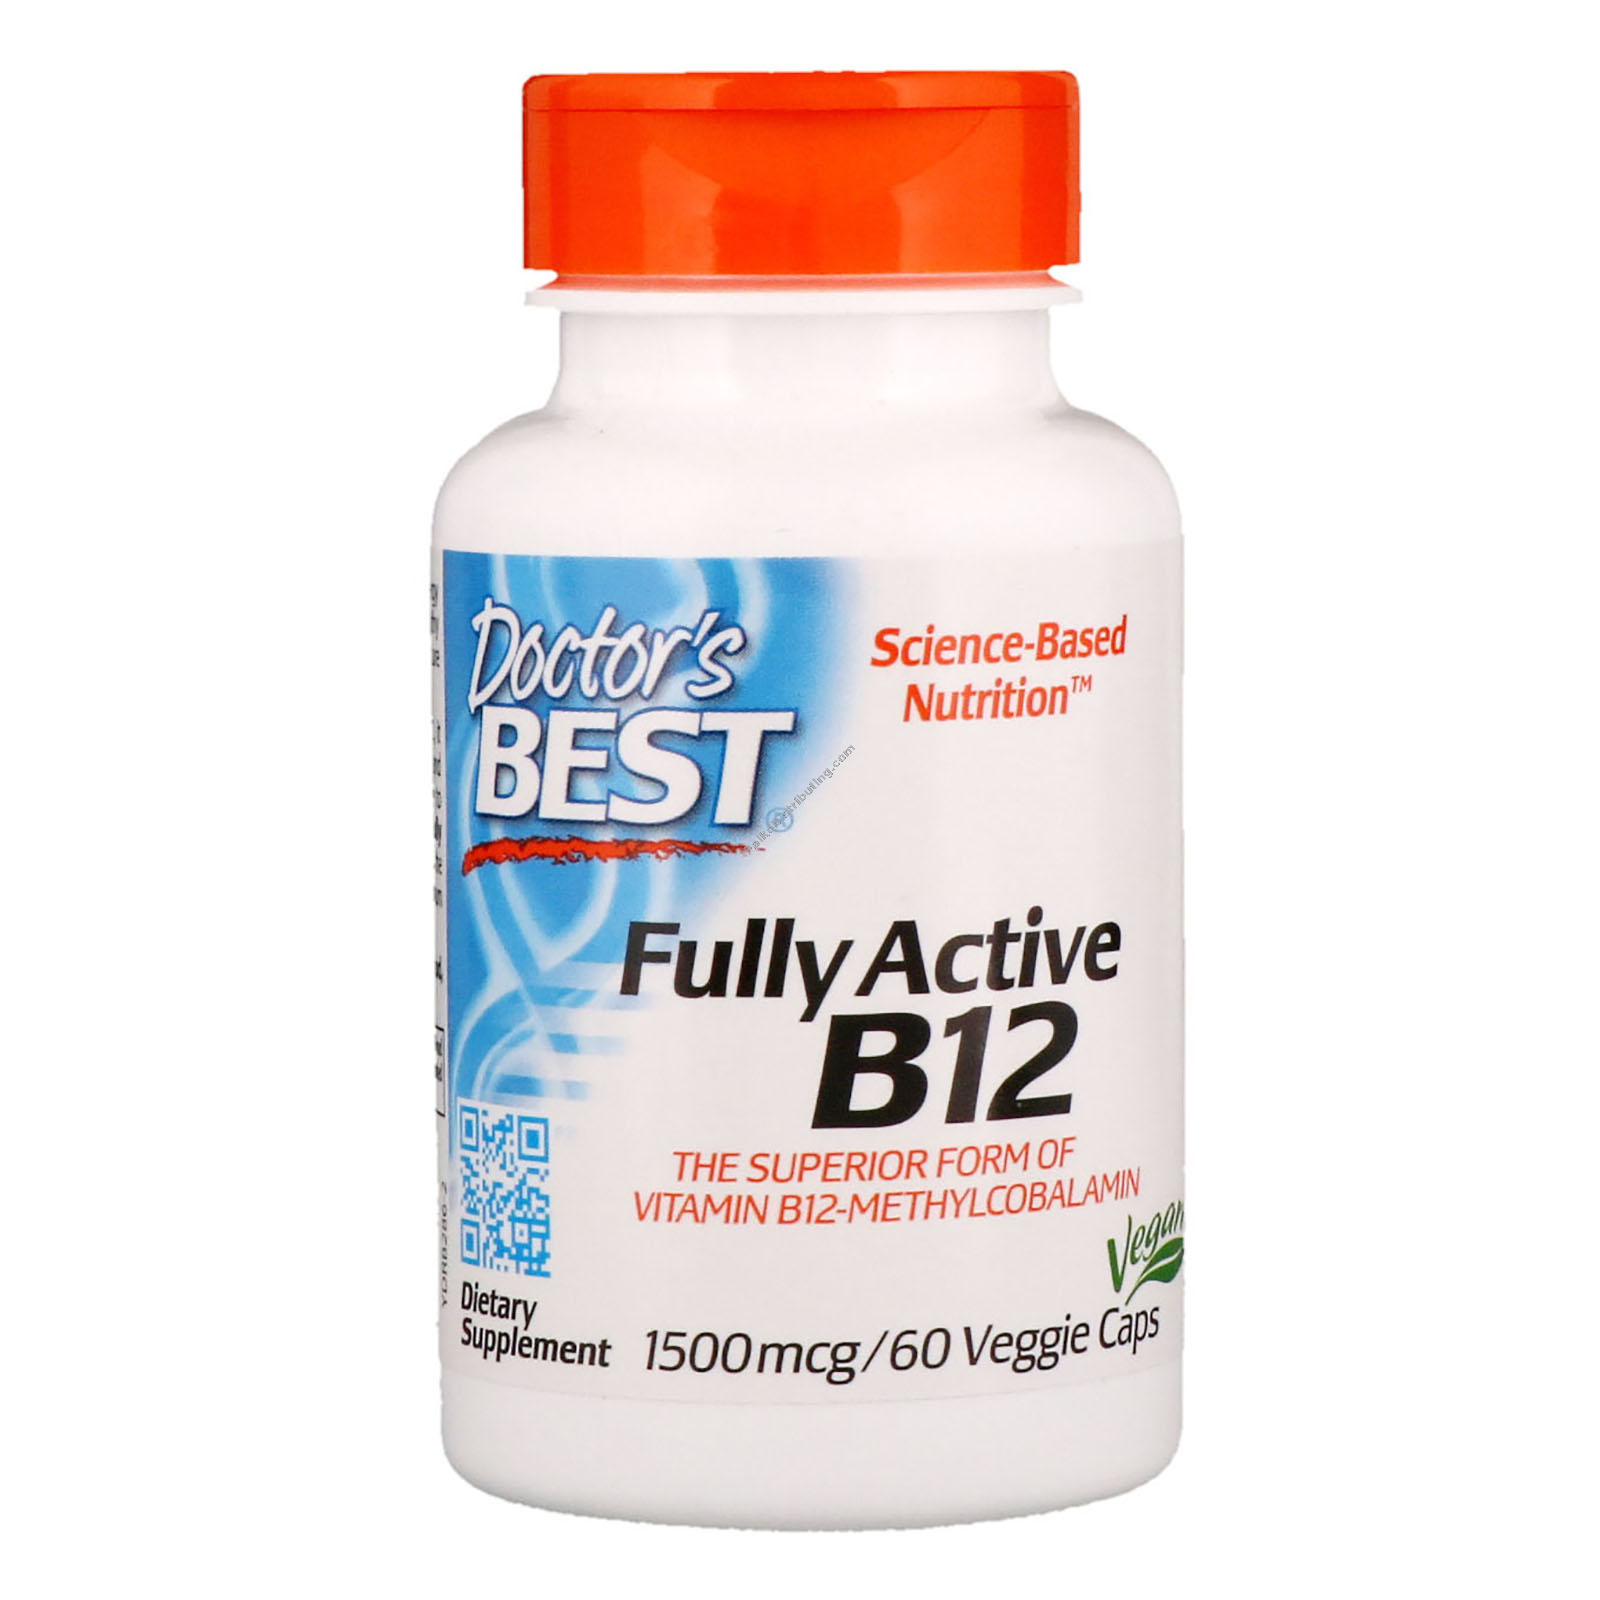 Product Image: Fully Active B12 1500mcg